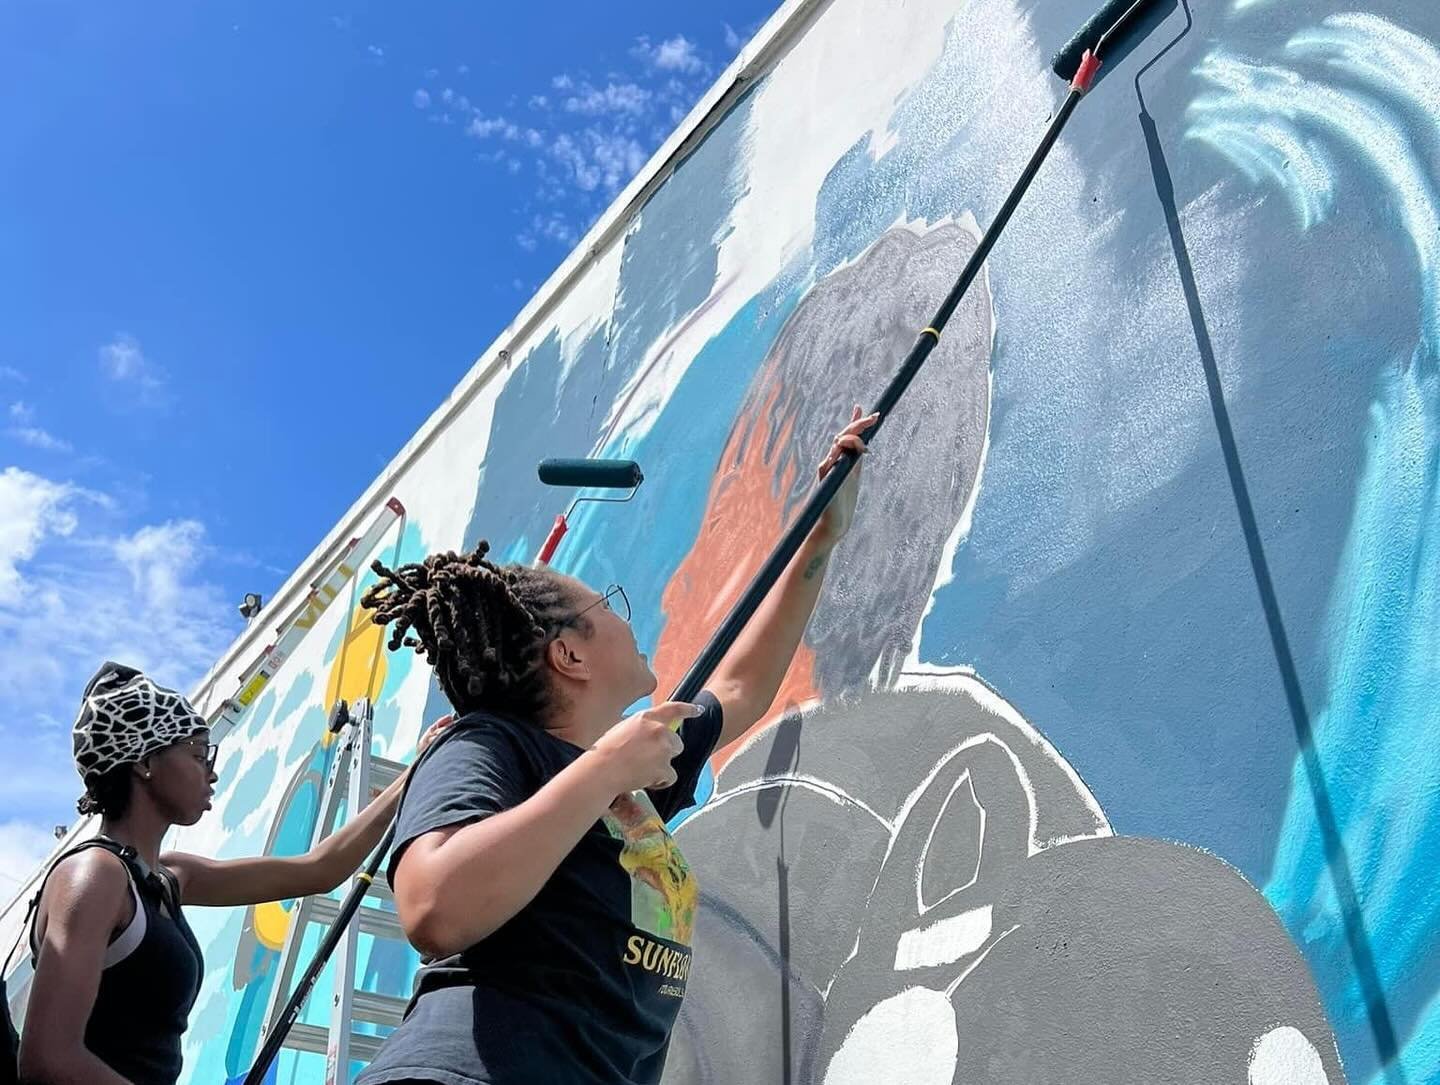 Join the @JaxWallProject x Phoenix Arts &amp; Innovation District for a Spring Mural Jam! We will be providing space in the  neighborhood to create an outdoor gallery on the walls of the district on Saturday, May 18th and Sunday, May 19th. Visit our 